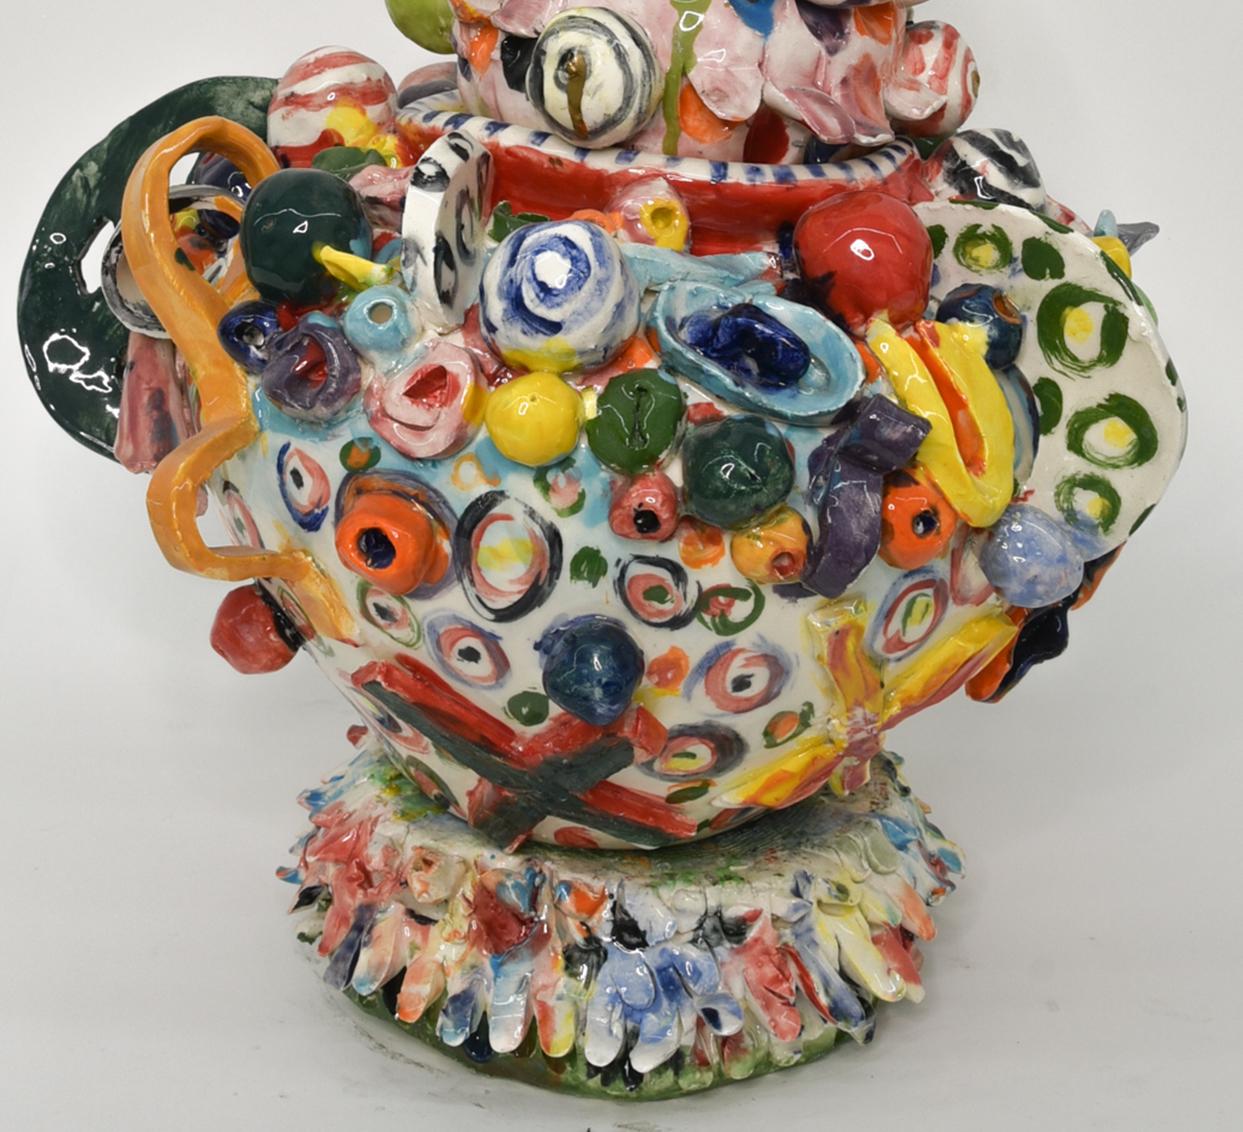 Untitled XII. Glazed ceramic abstract jar sculpture - Sculpture by Charo Oquet